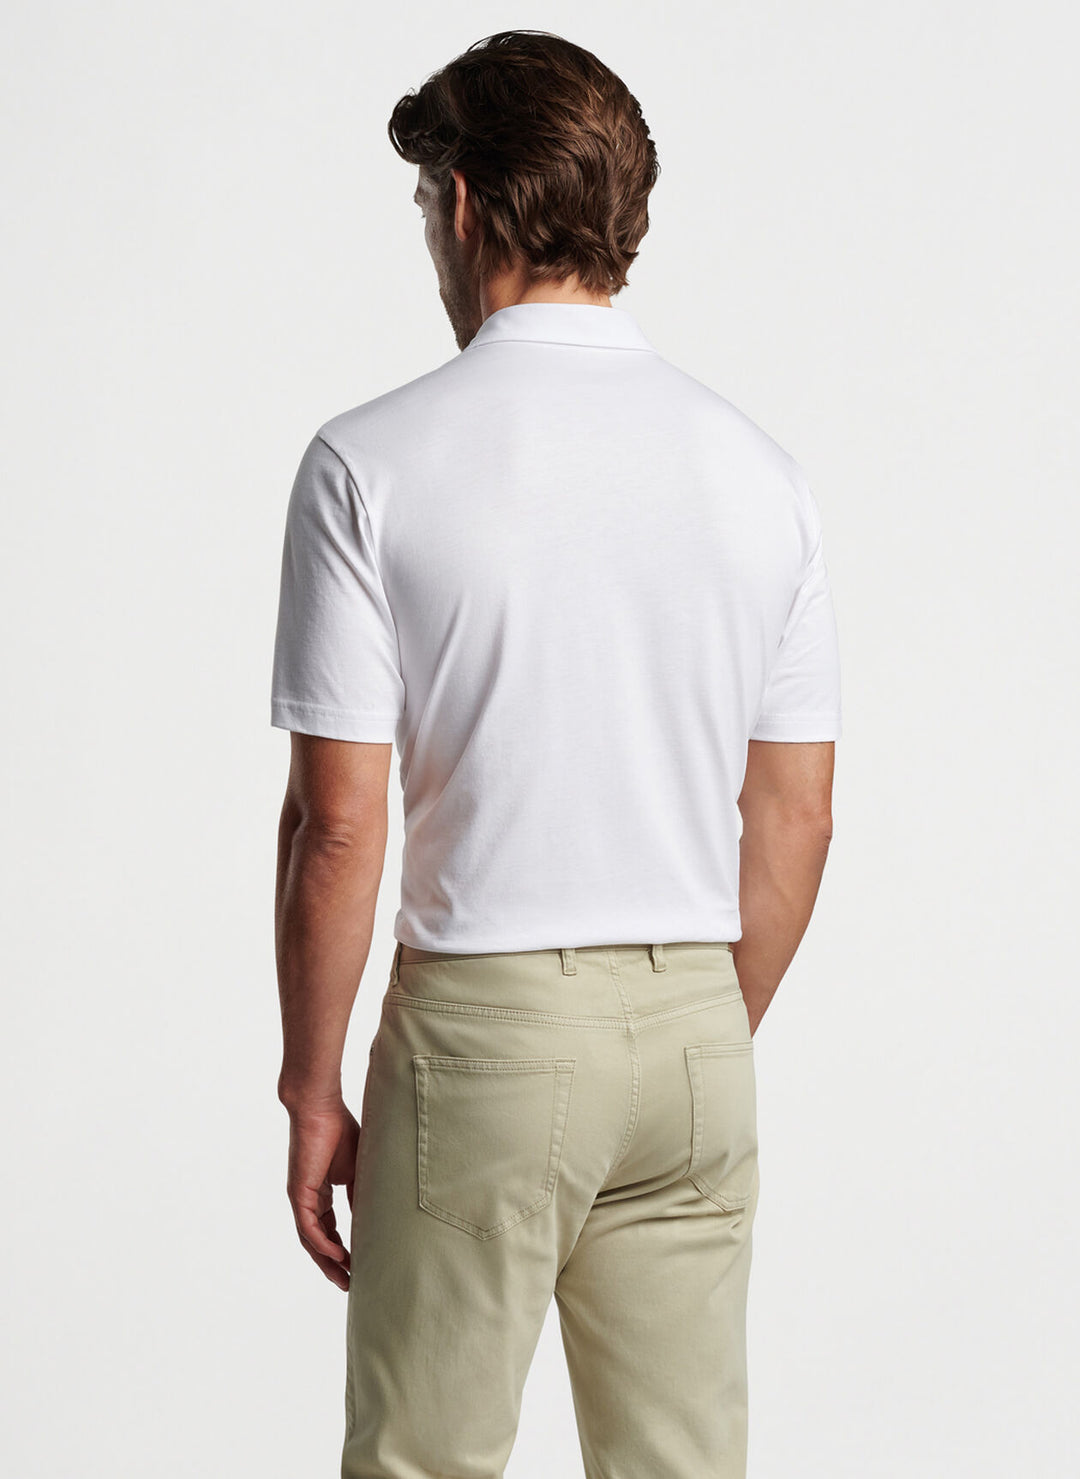 Peter Millar Crown Comfort Cotton Polo In White